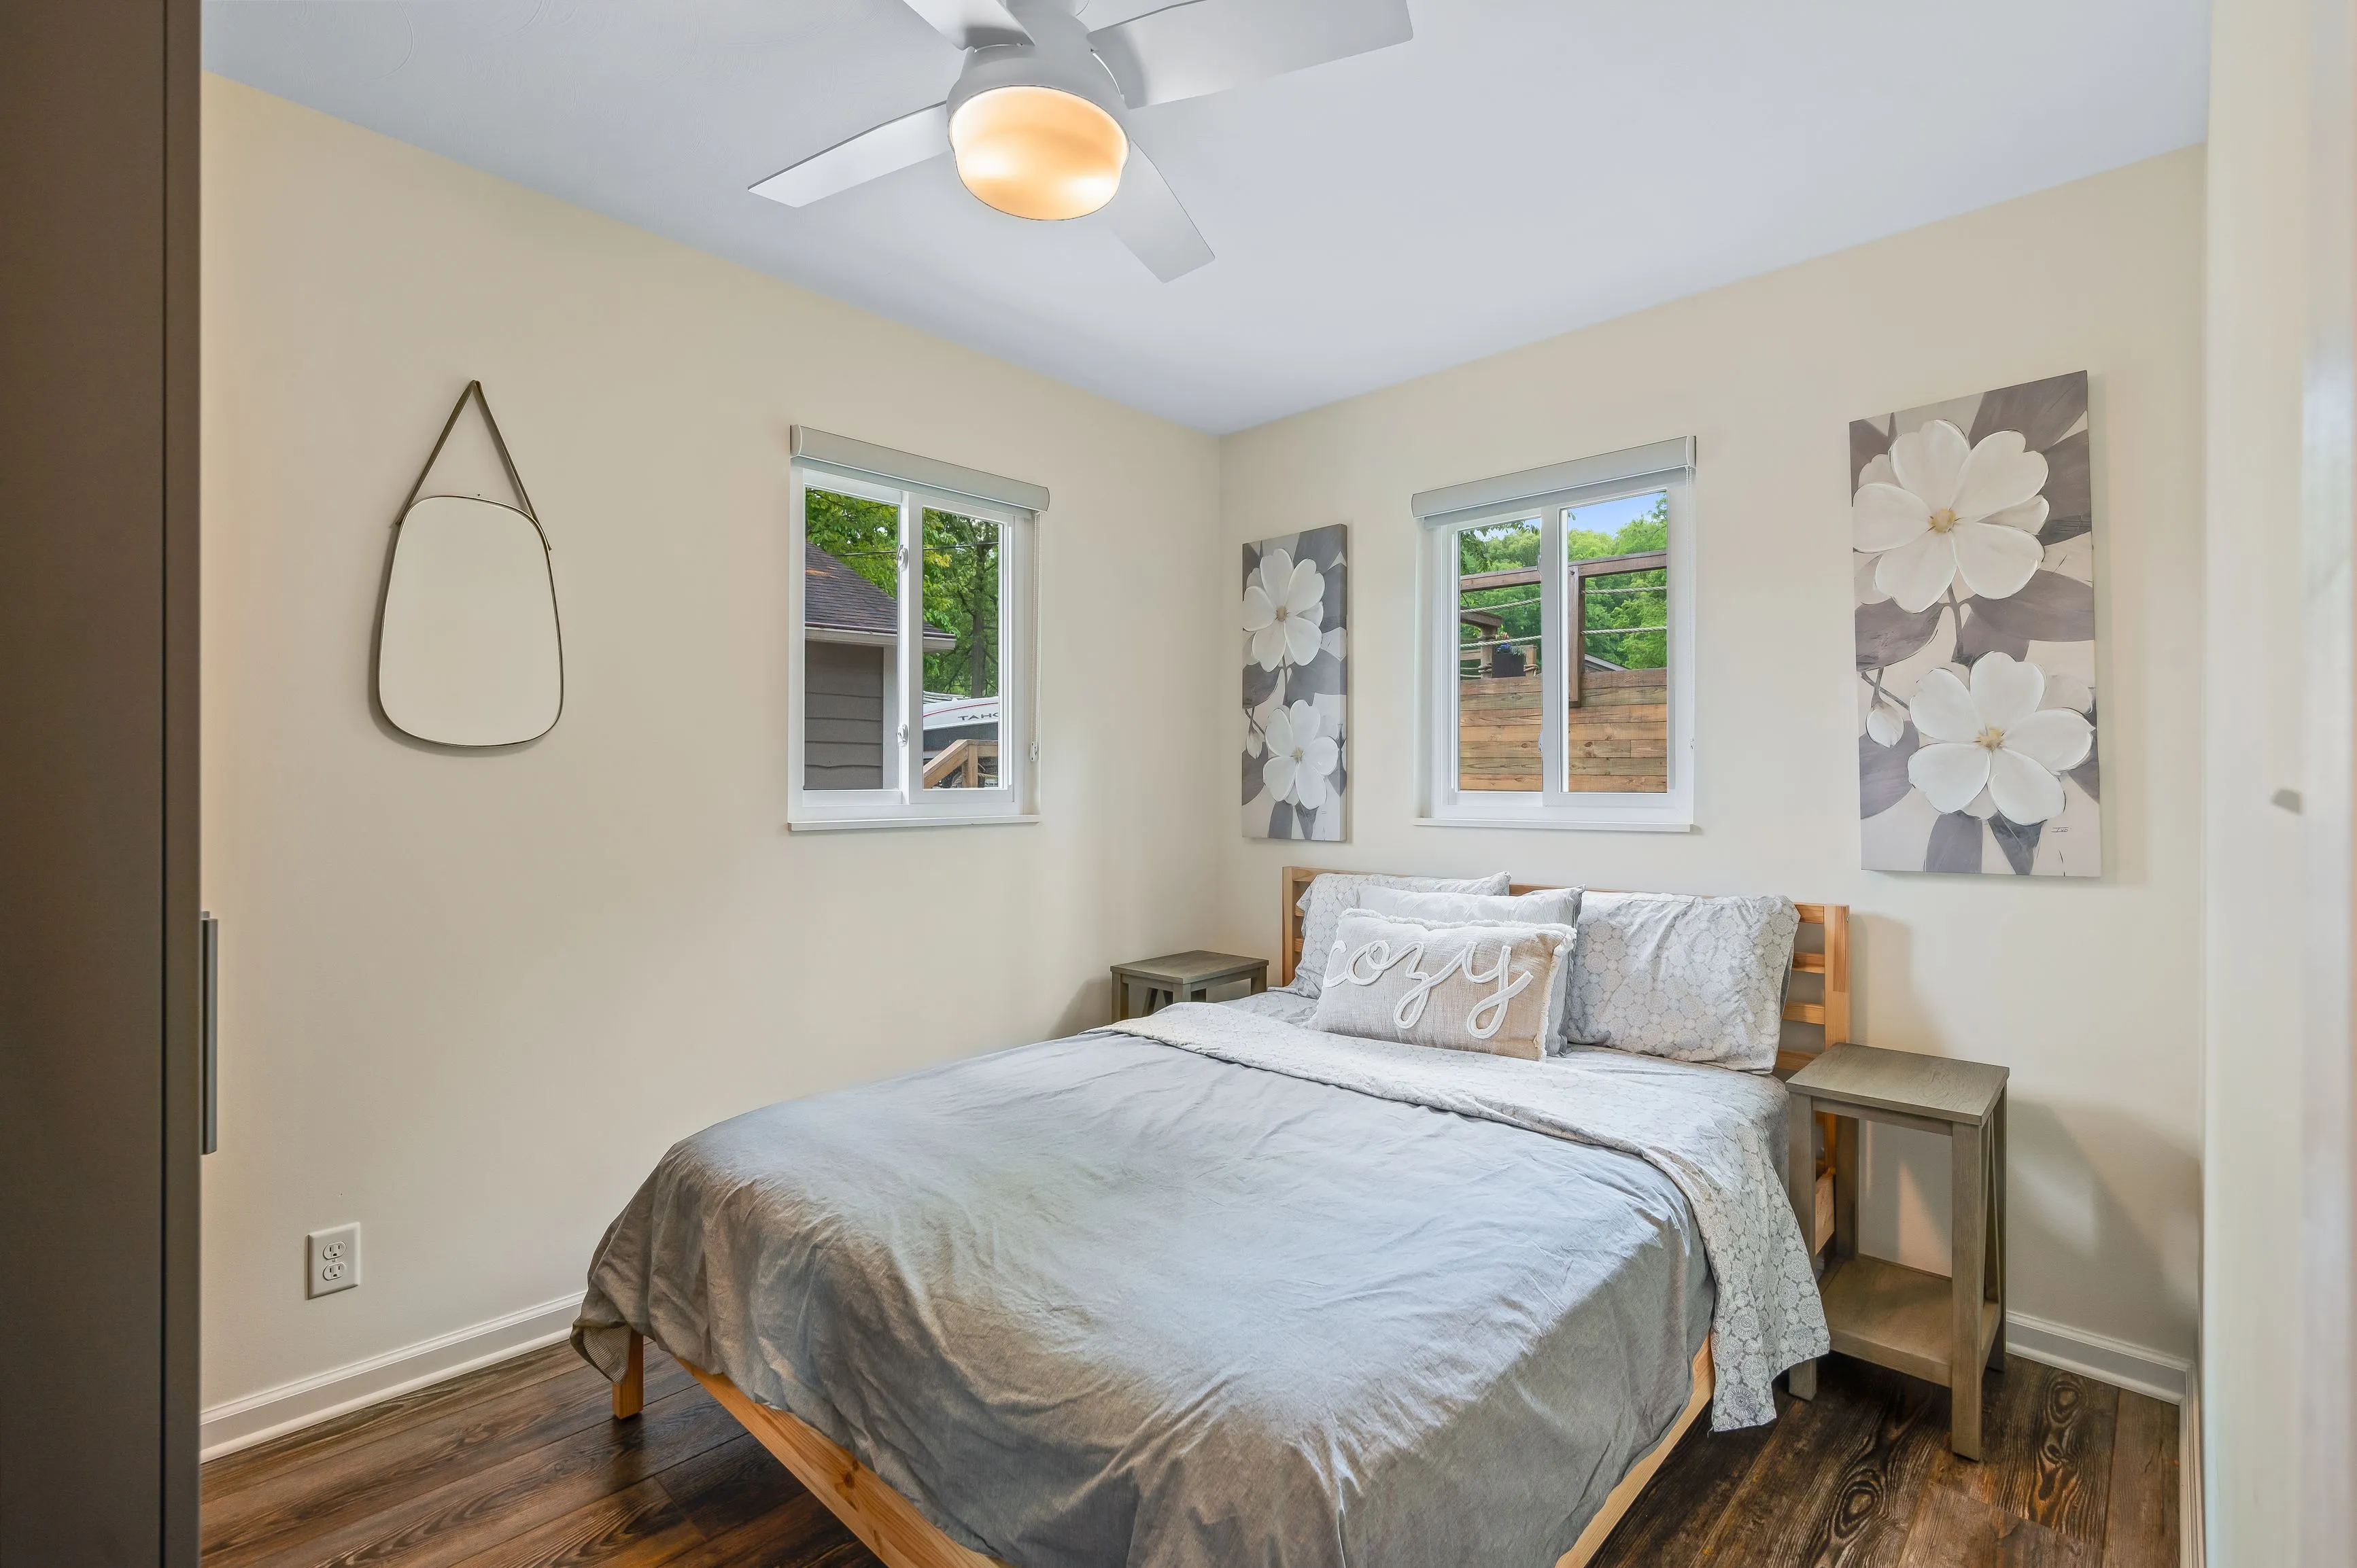 Bright cozy bedroom with a double bed, white linens, wooden bedside bench, light walls, two windows, and a ceiling fan.